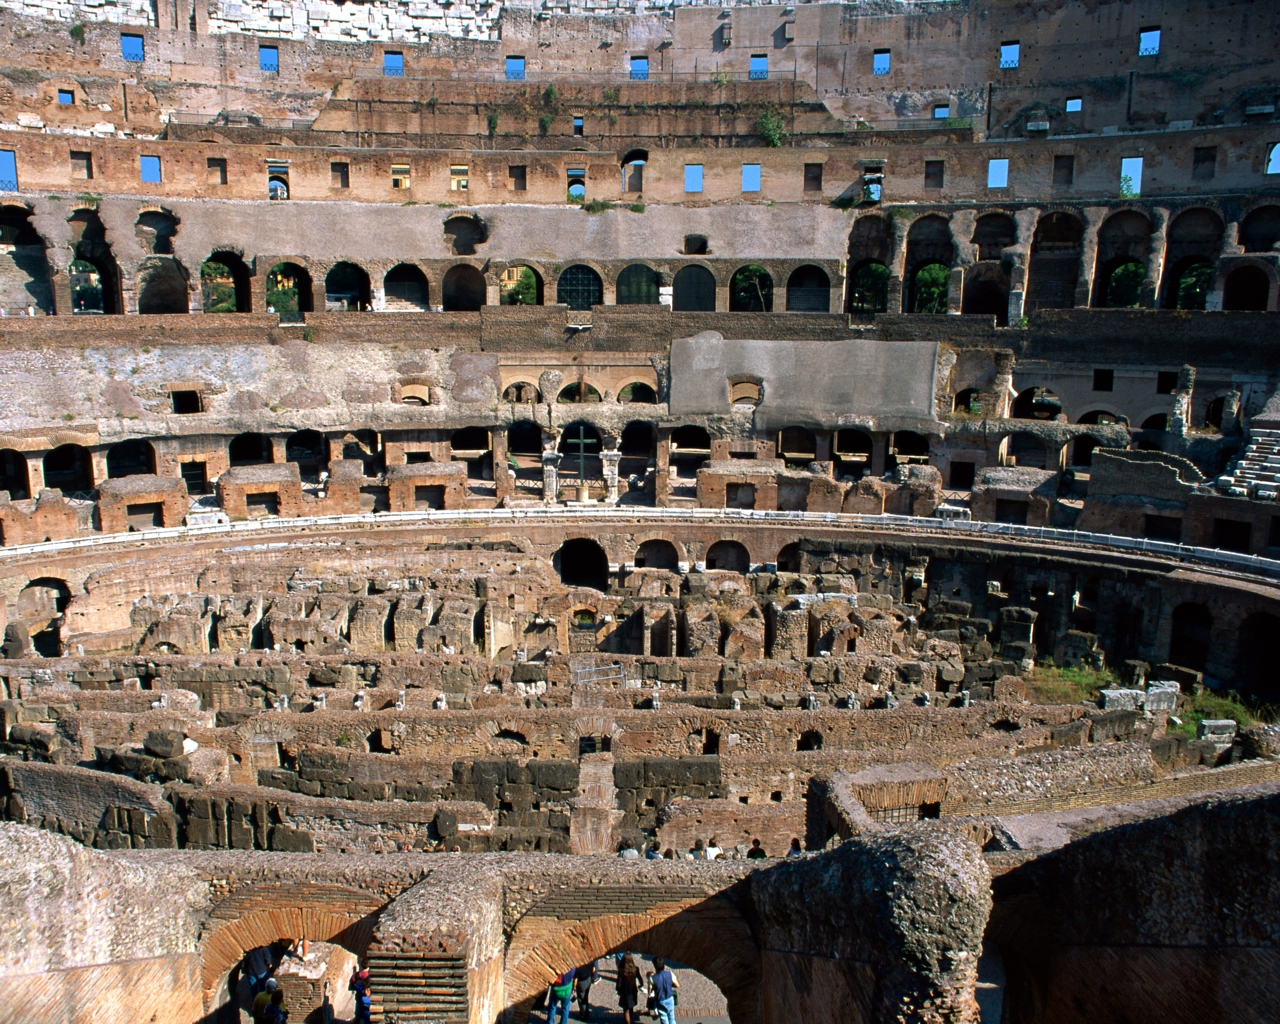 Download HQ The Coliseum (lat. Colosseum, italy Colosseo) Italy wallpaper / 1280x1024